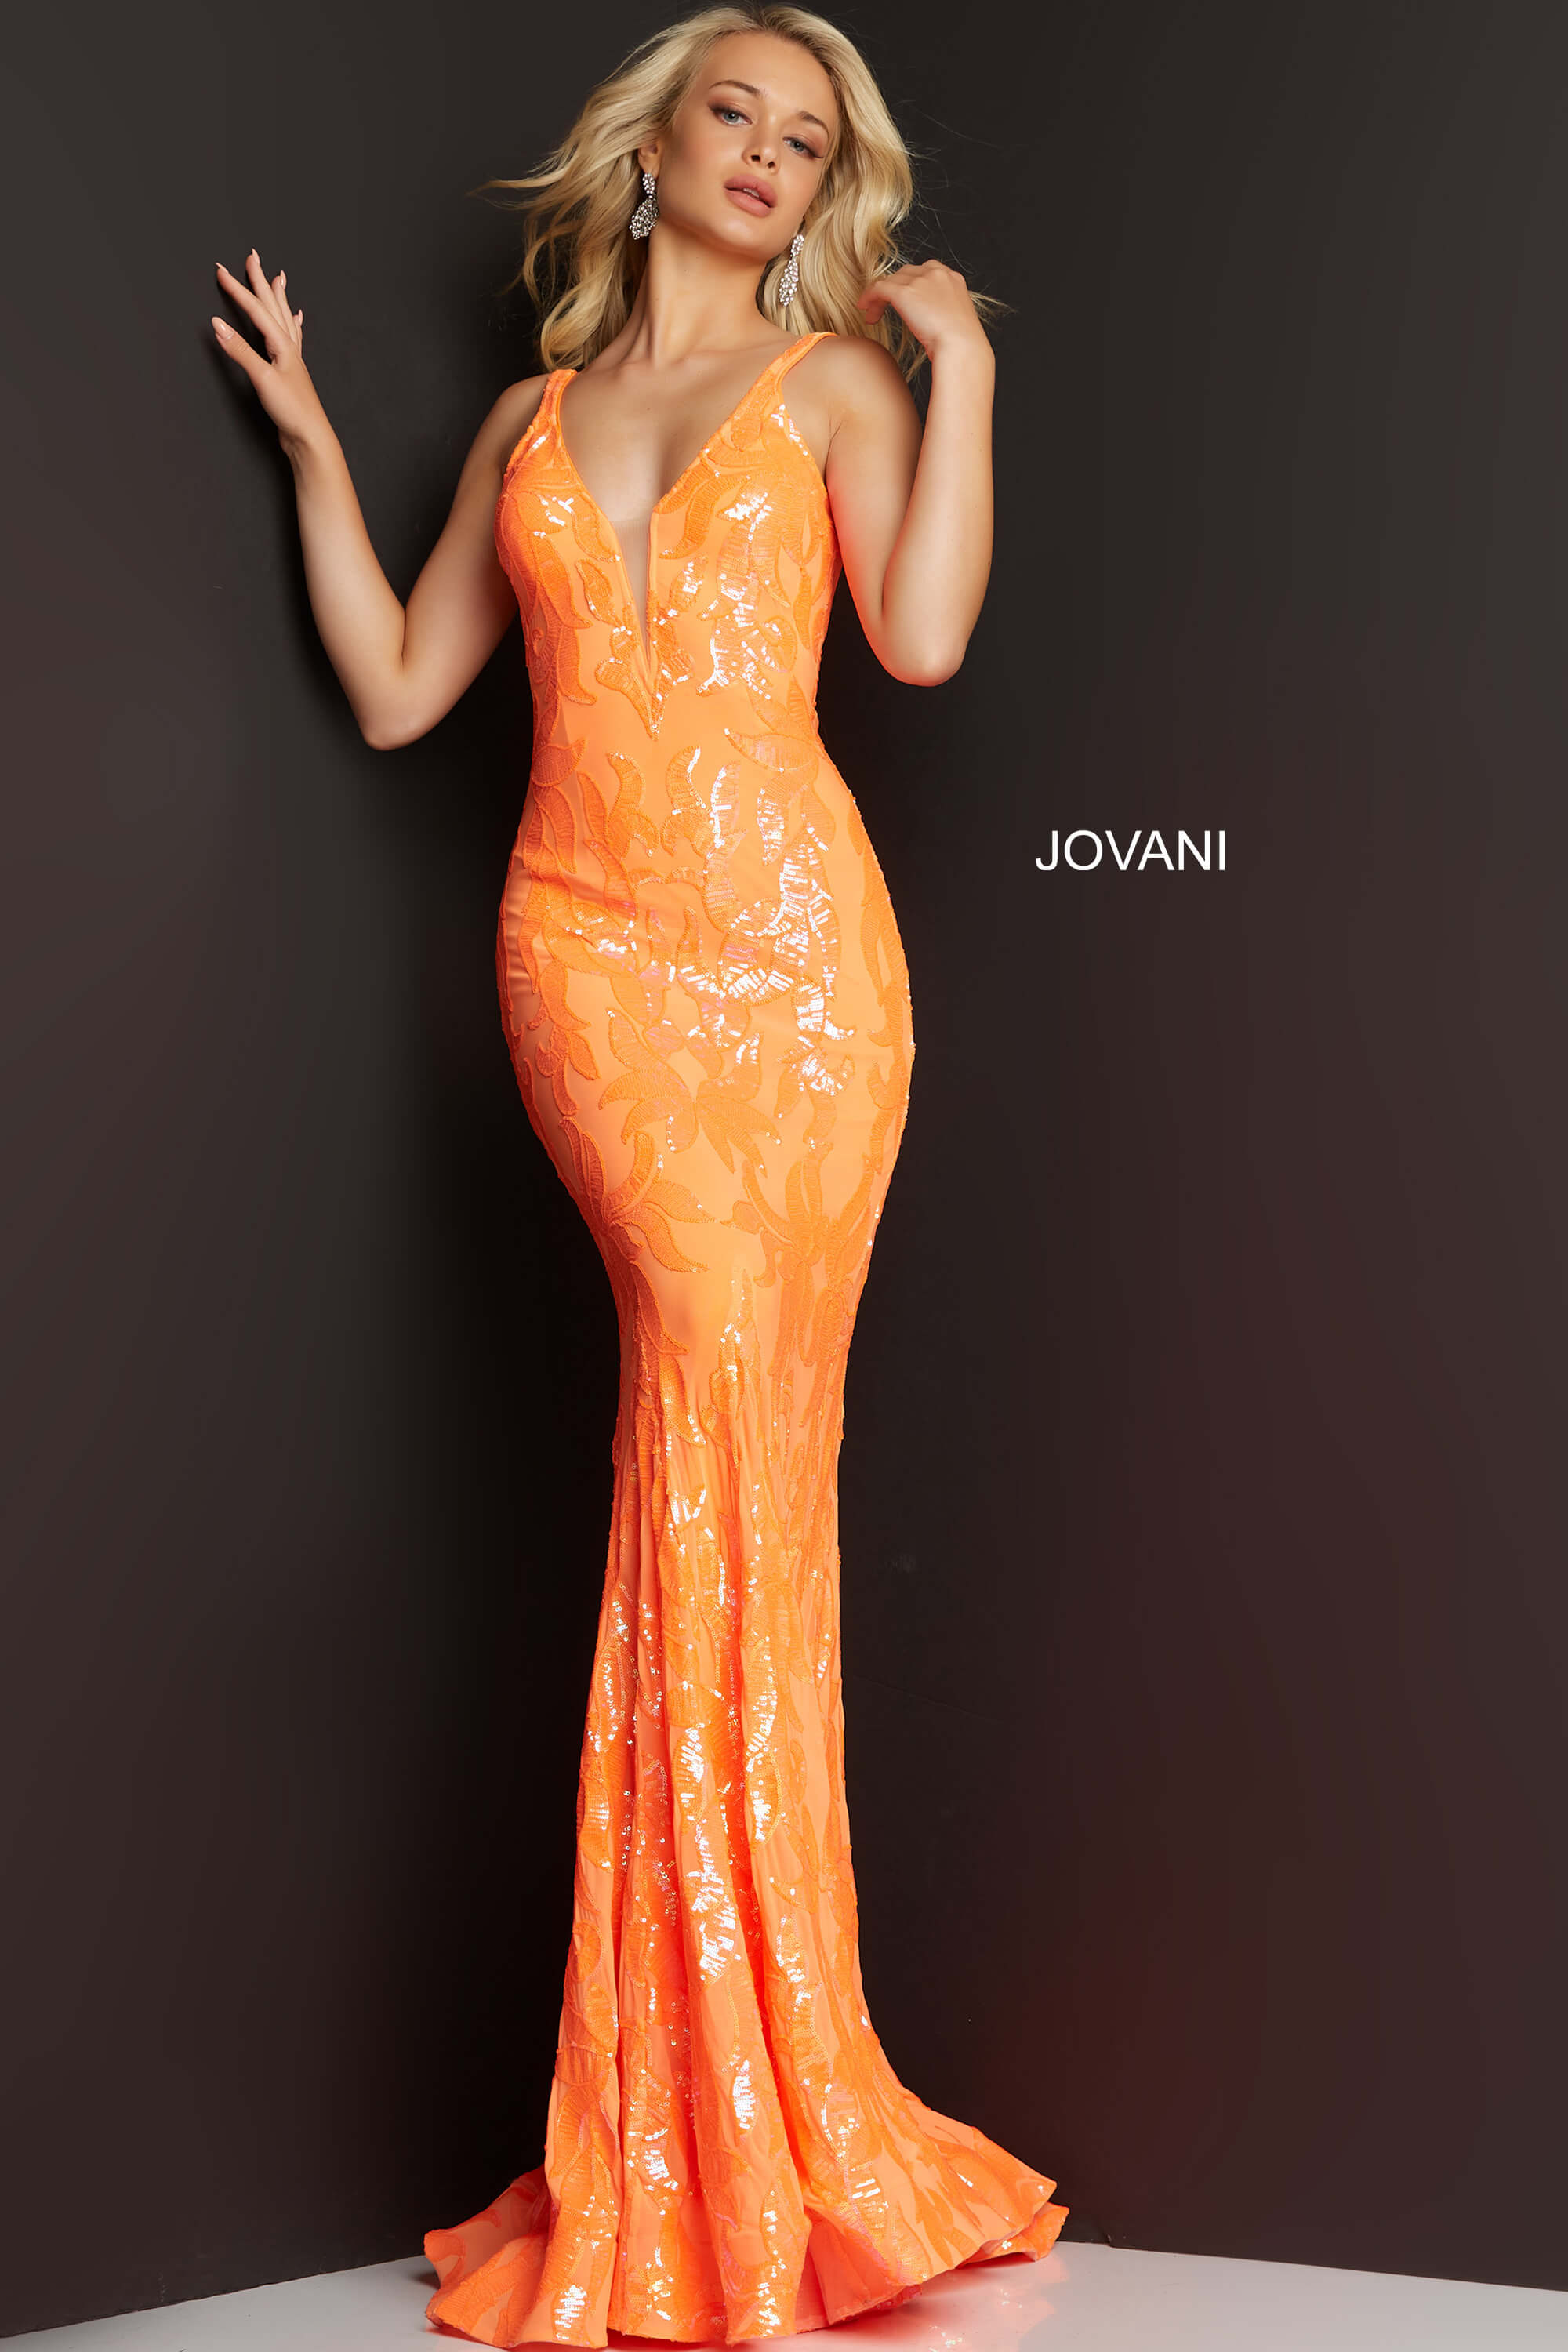 Plunging Neckline Fitted Prom Dress By Jovani -3263